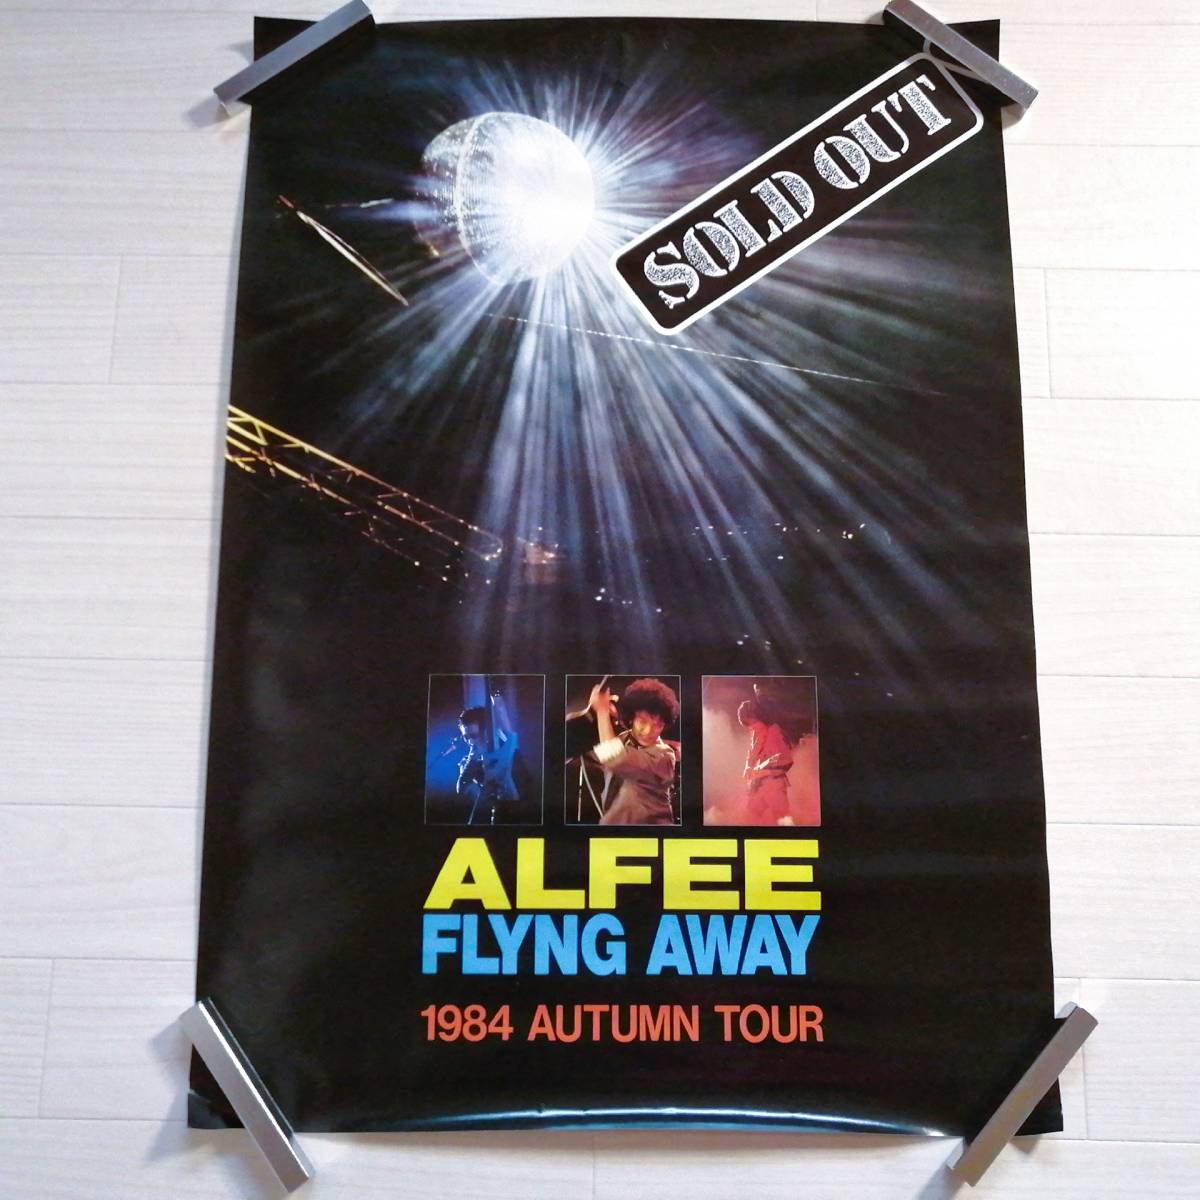 ALFEE Q⑪ 1984ツアー告知 ポスター FLYING AWAY AUTUMN TOUR SOLD OUT グッズ アルフィー 高見沢俊彦の画像1